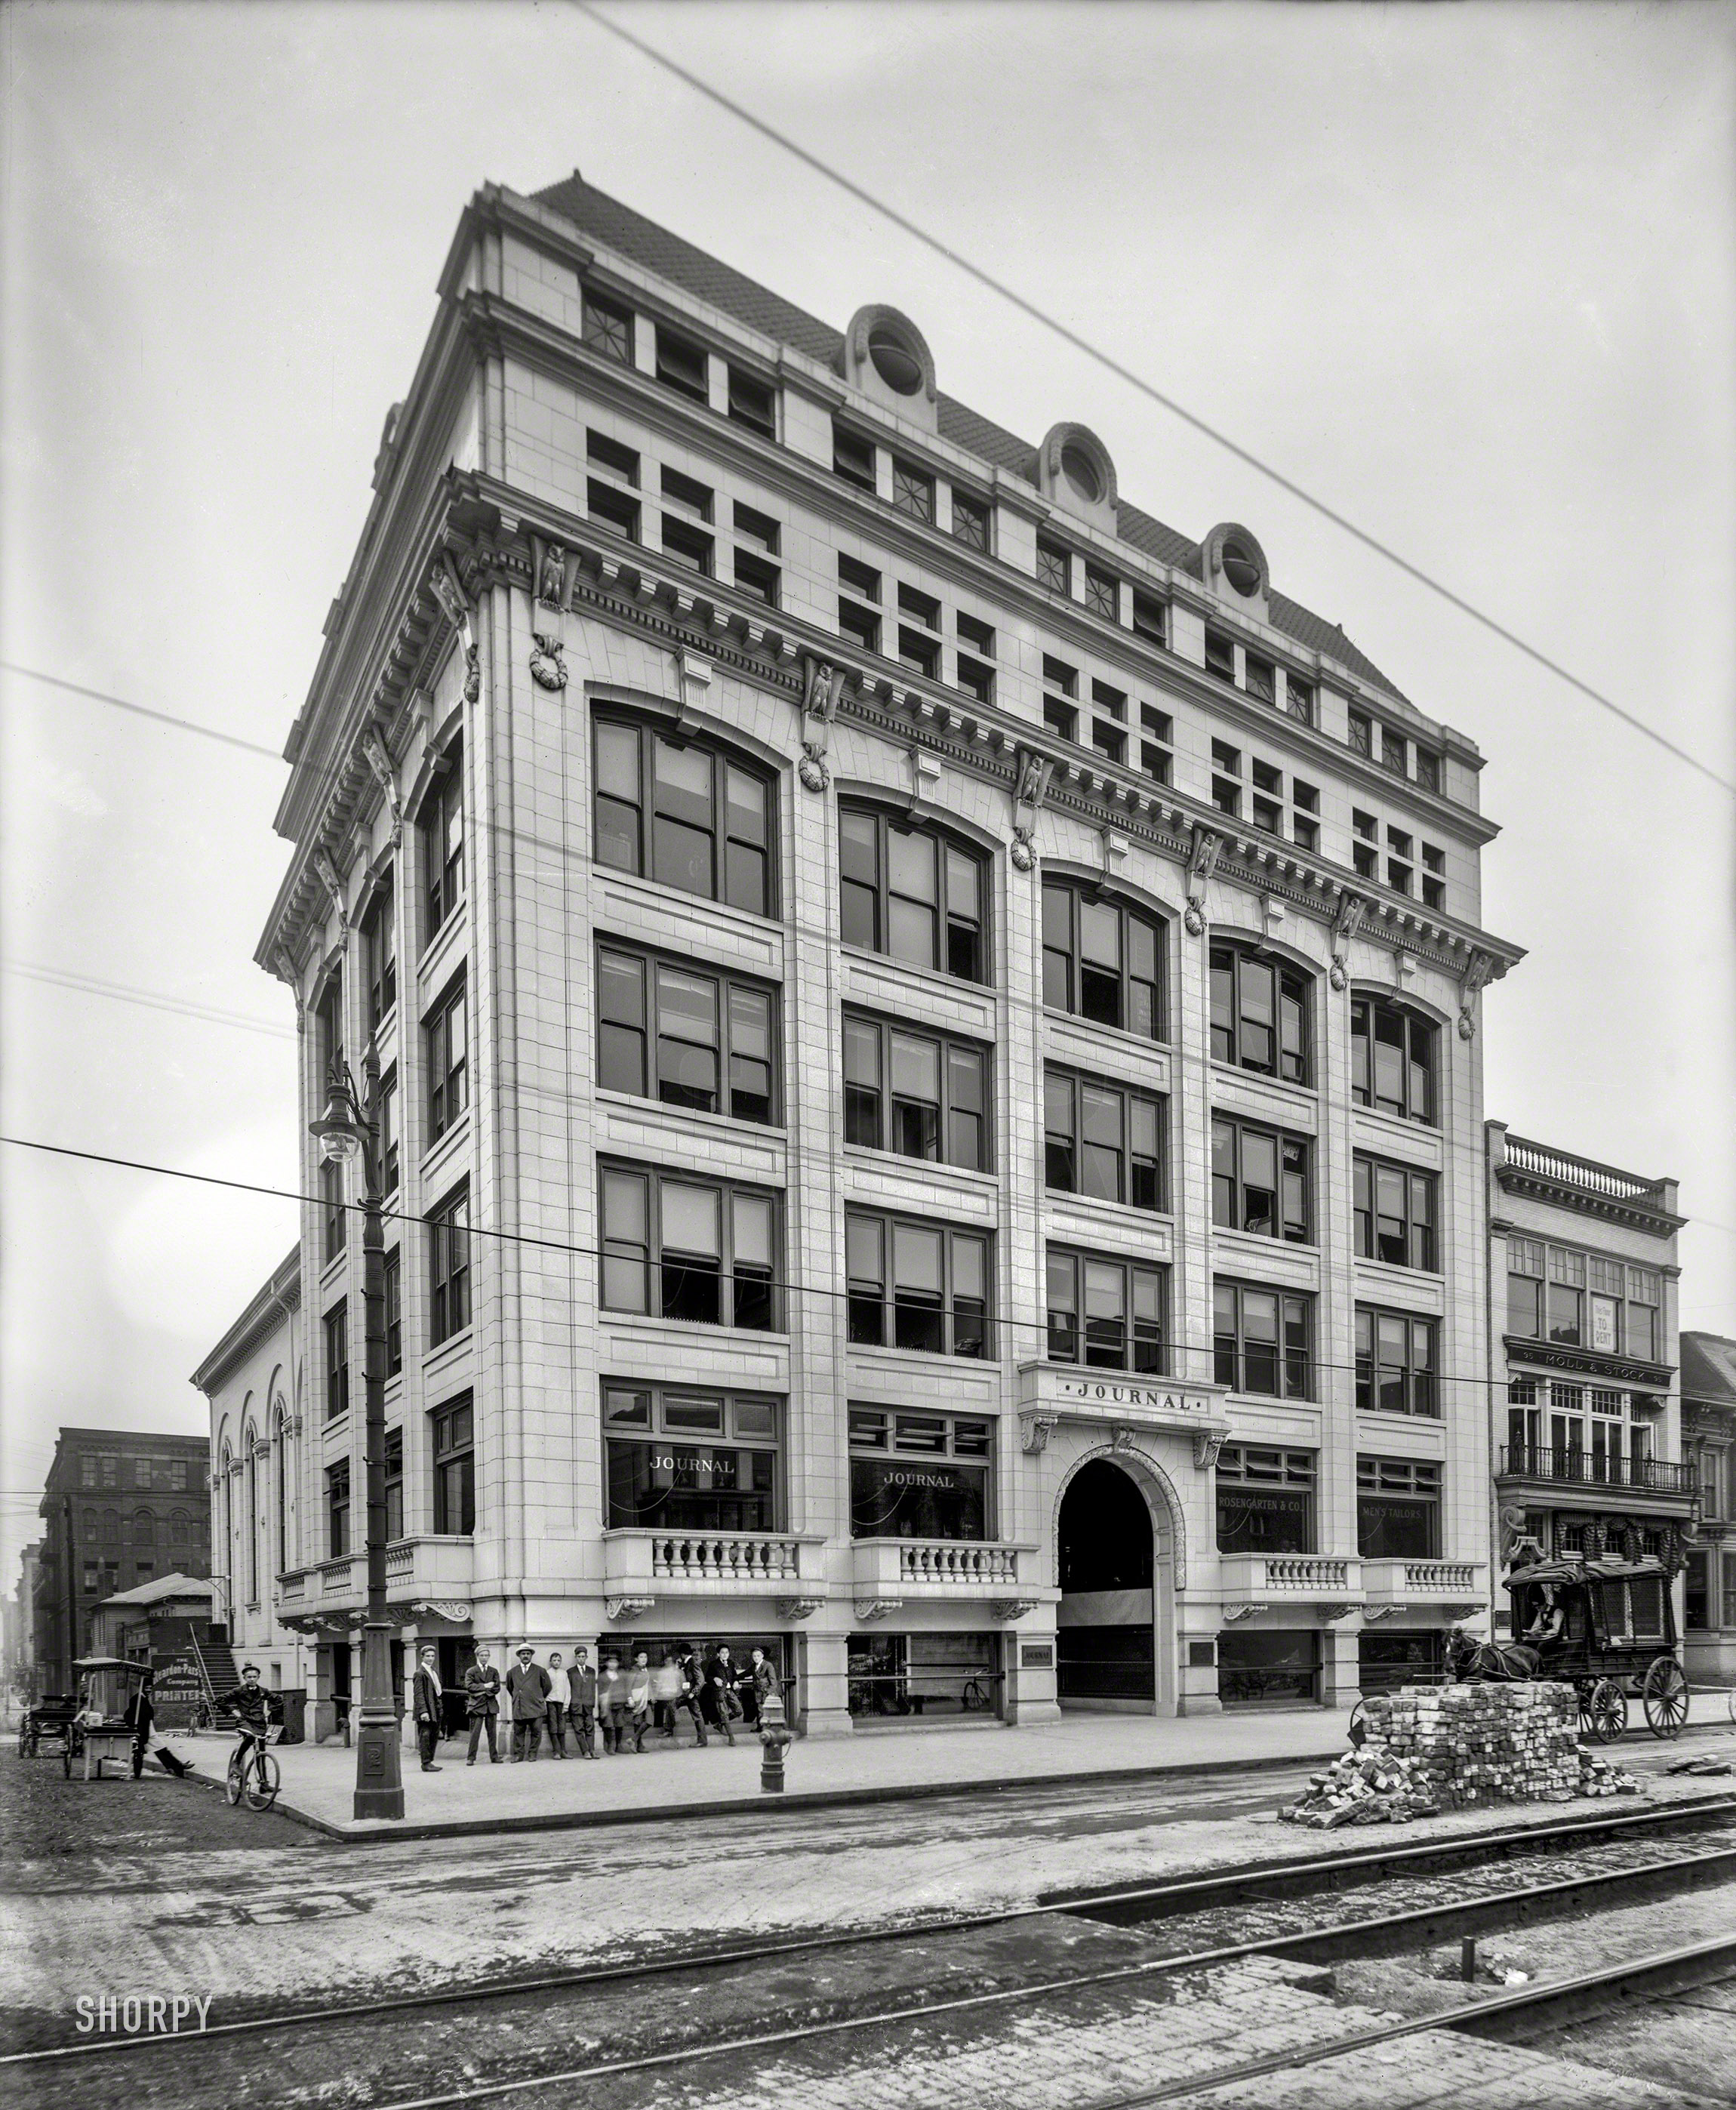 Detroit circa 1905. "Journal building at Fort and Wayne." 8x10 inch dry plate glass negative, Detroit Publishing Company. View full size.